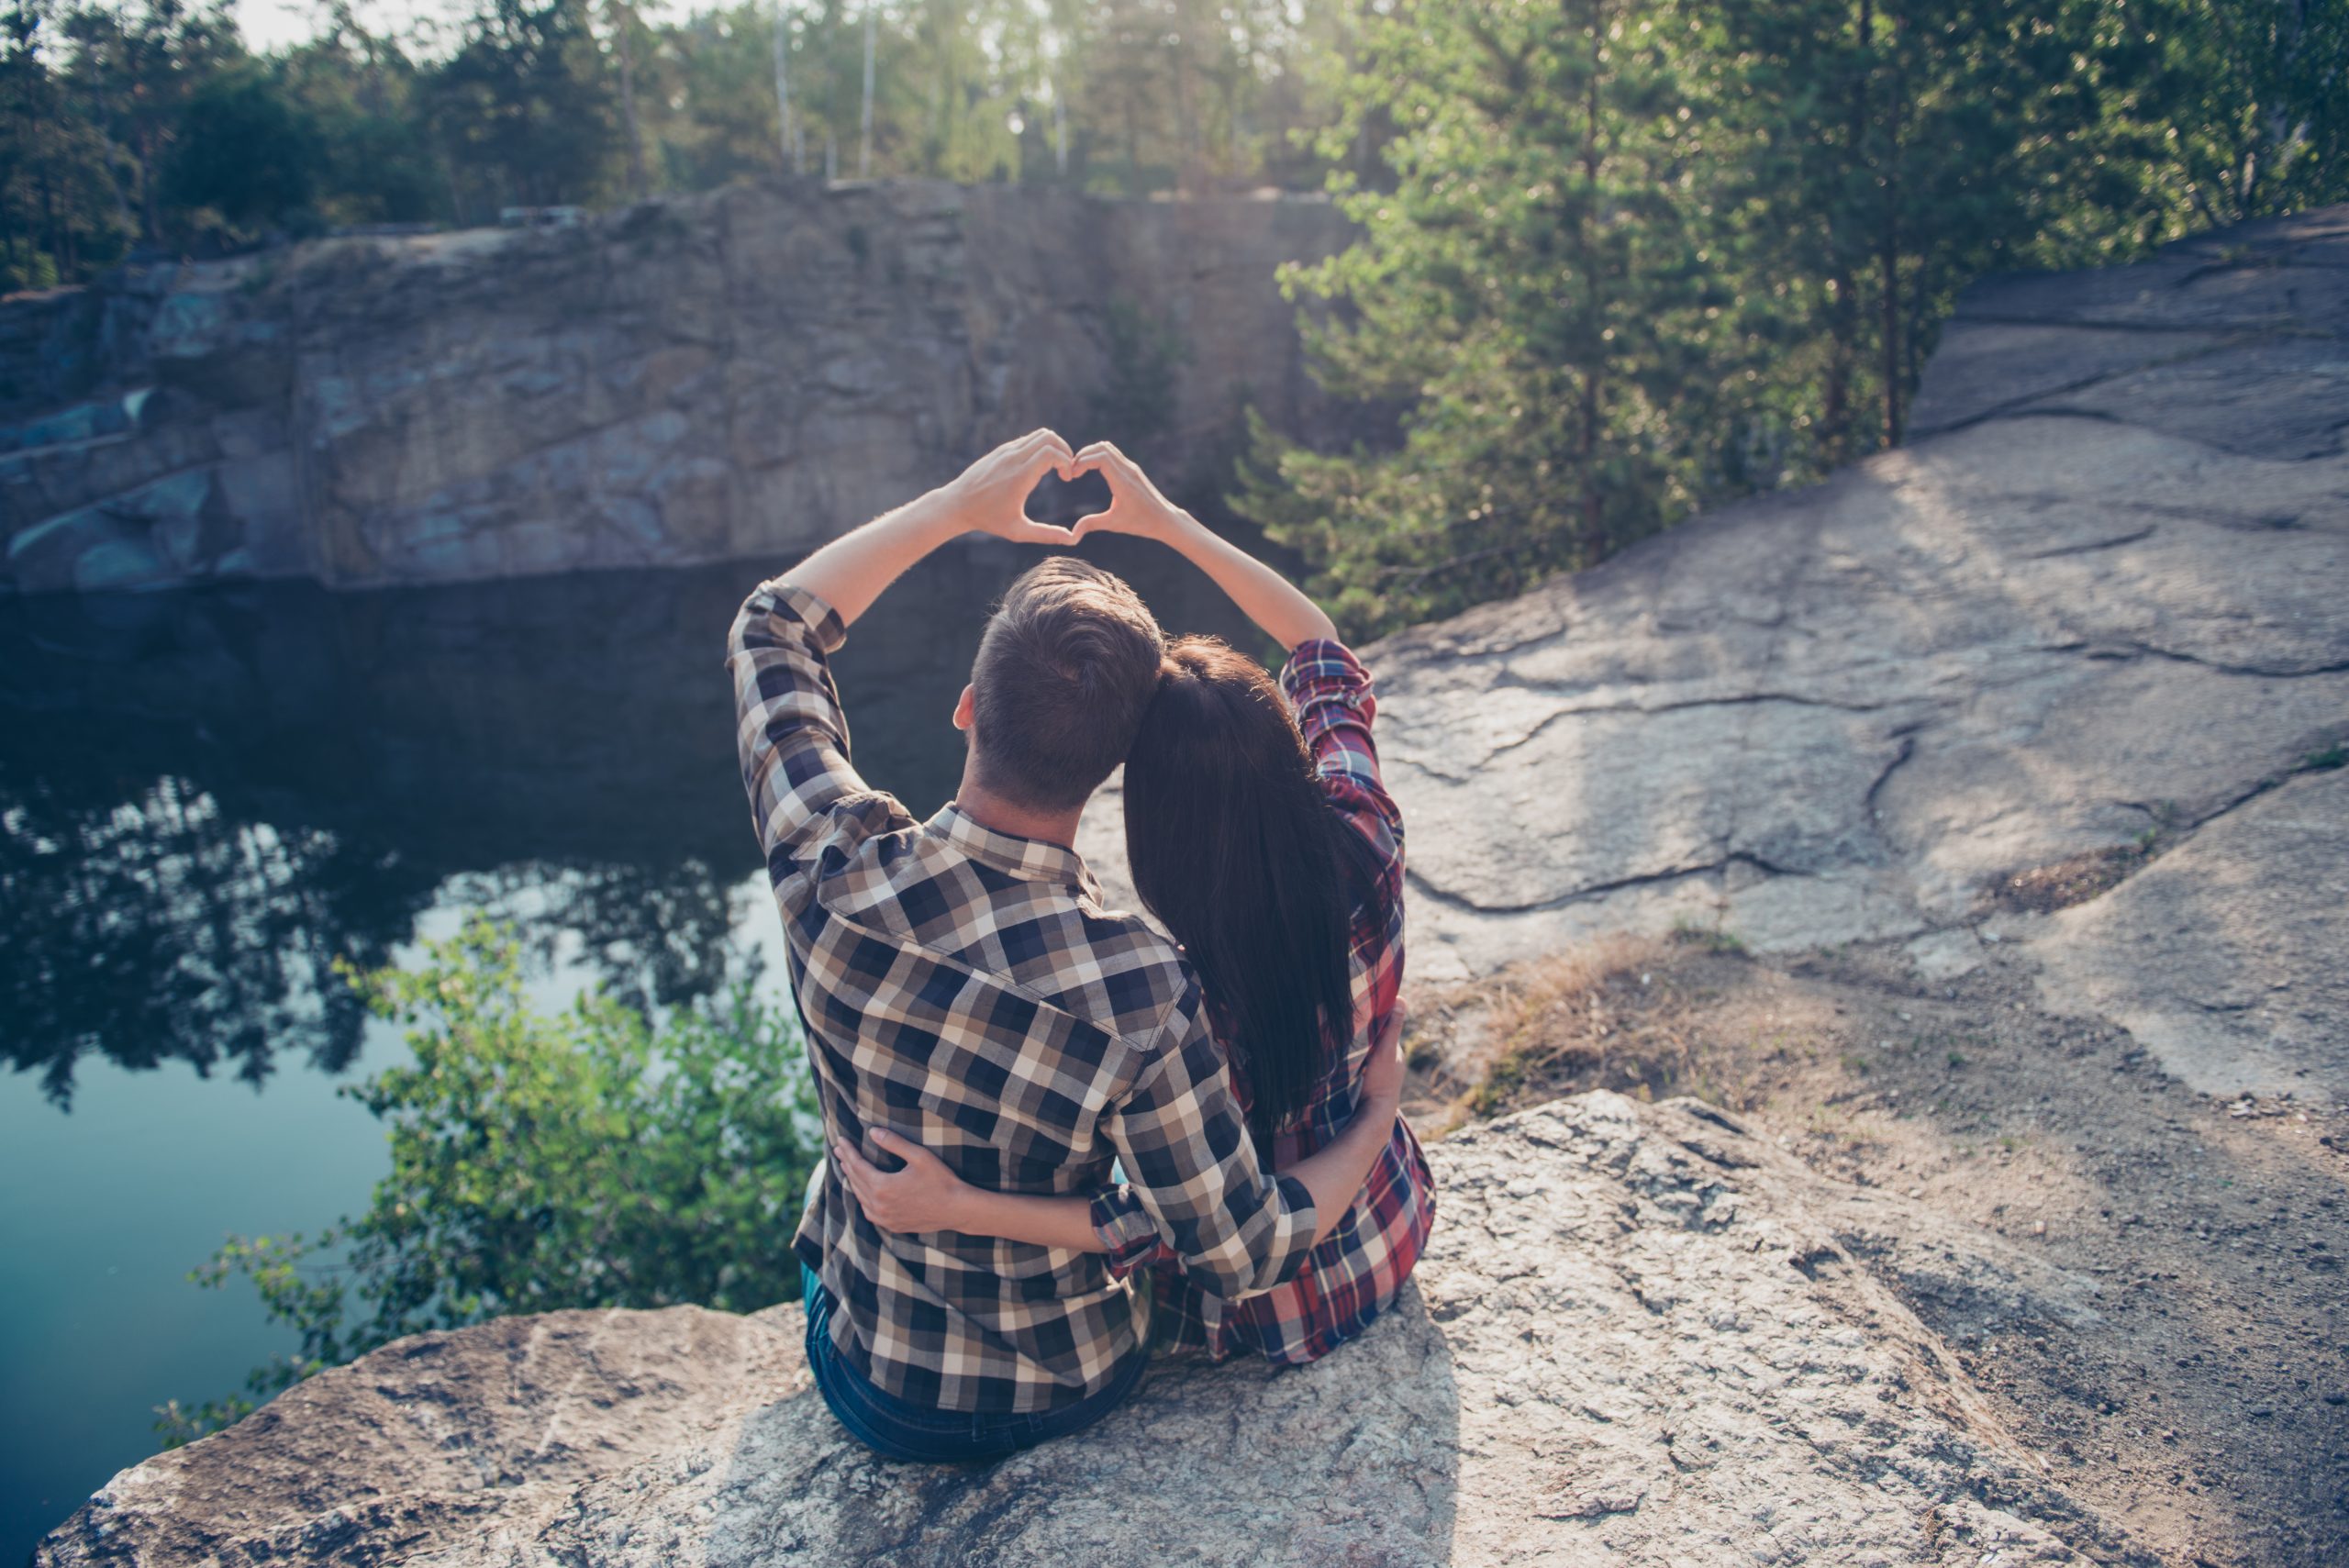 Good shiny morning in wood! Rear back high angle view of two people in love, wearing casual, sitting on the top of canyon stone rock, embracing, making heart shape with hands